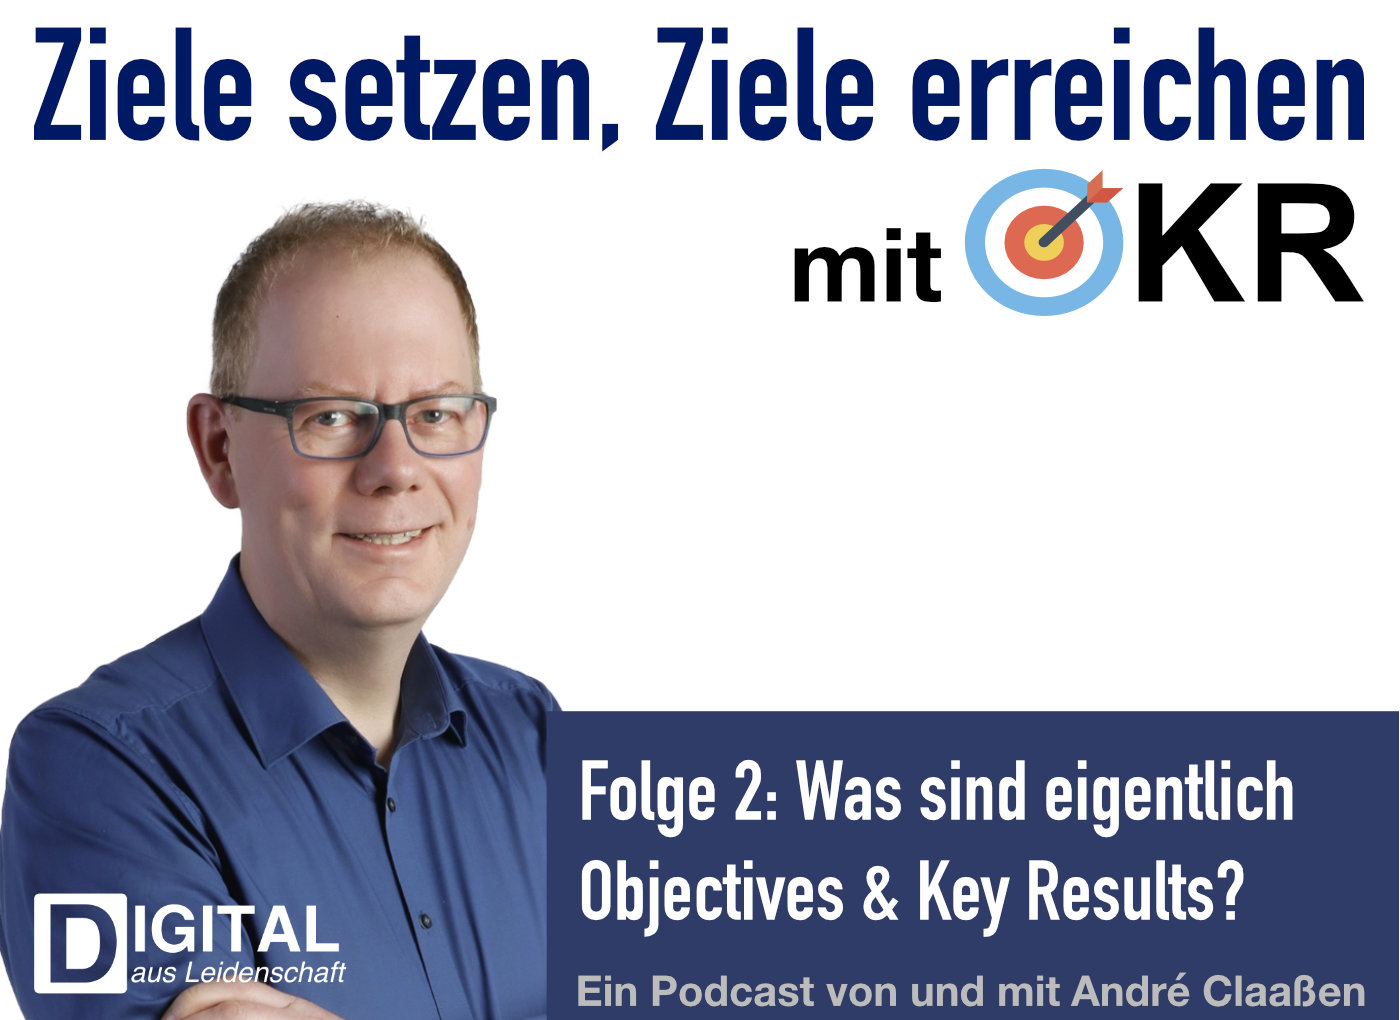 podcast/okr/okr-podcast-episode-2-was-sind-objectives-and-key-results/okr-podcast-cover.jpg